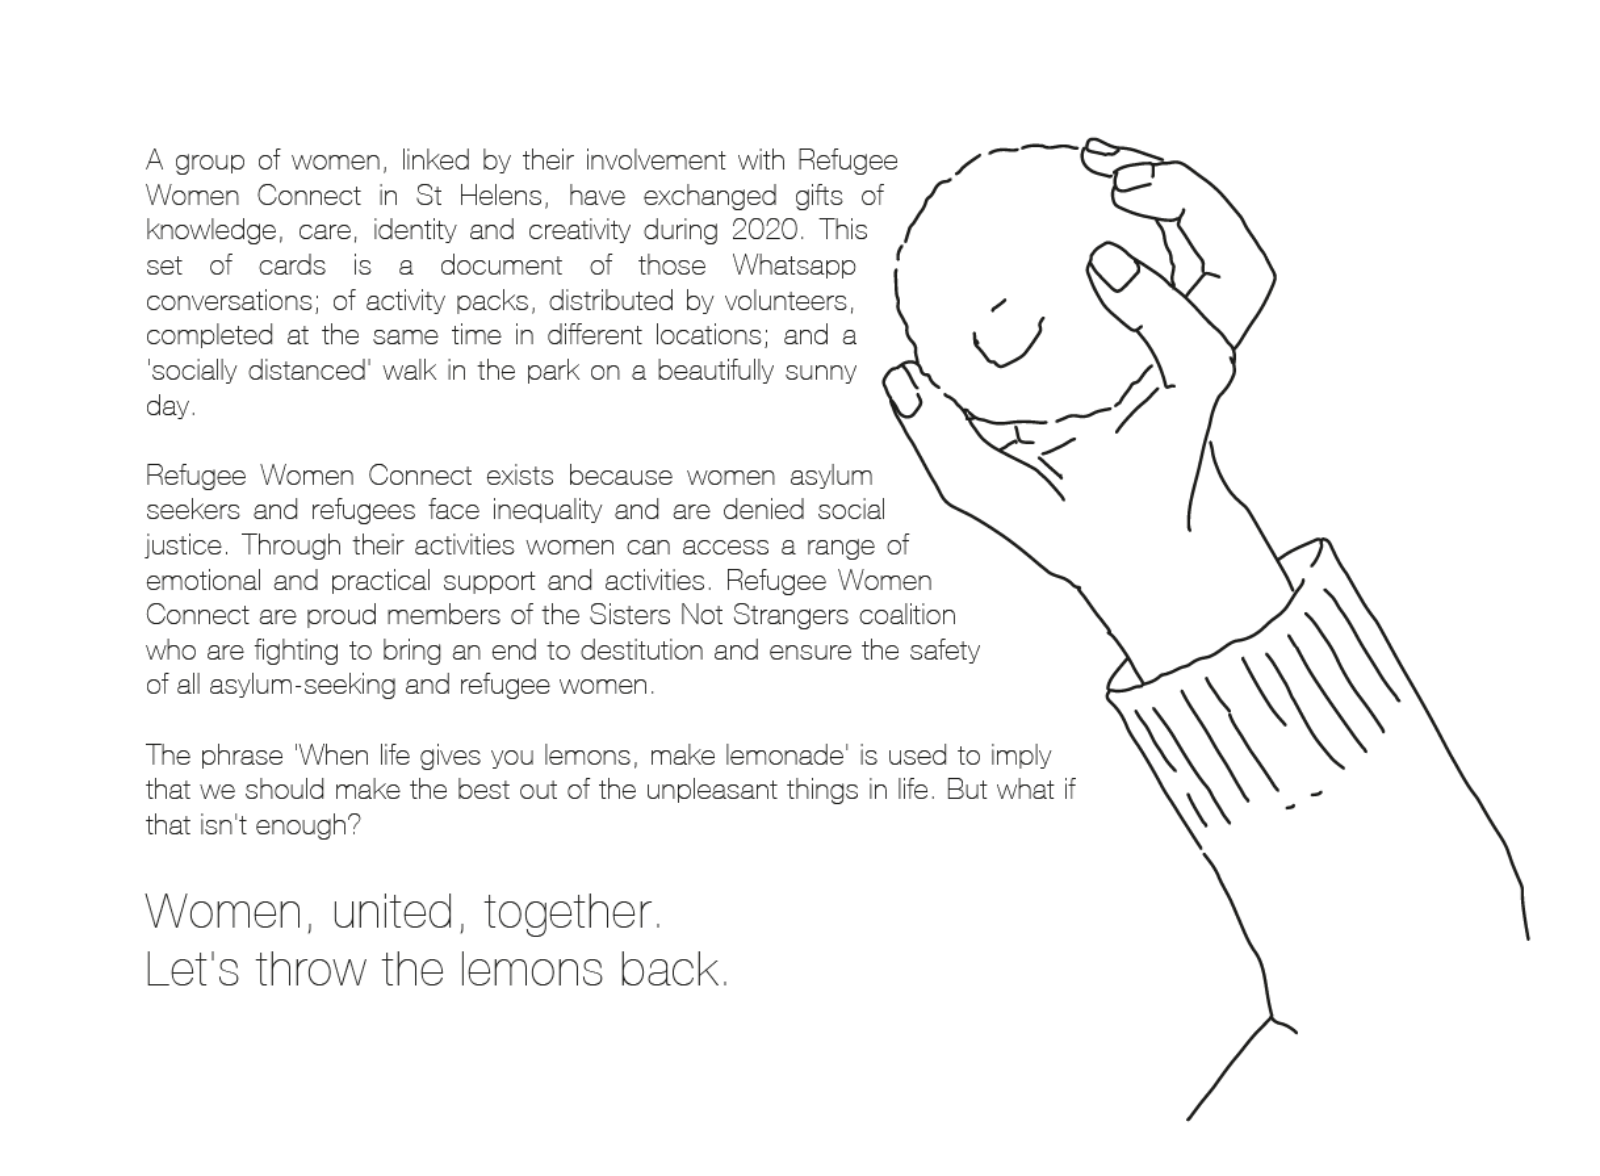 Black text on a white background with a line drawing of a hand holding a ball. The text explains the project Walking Together, Walking Apart.